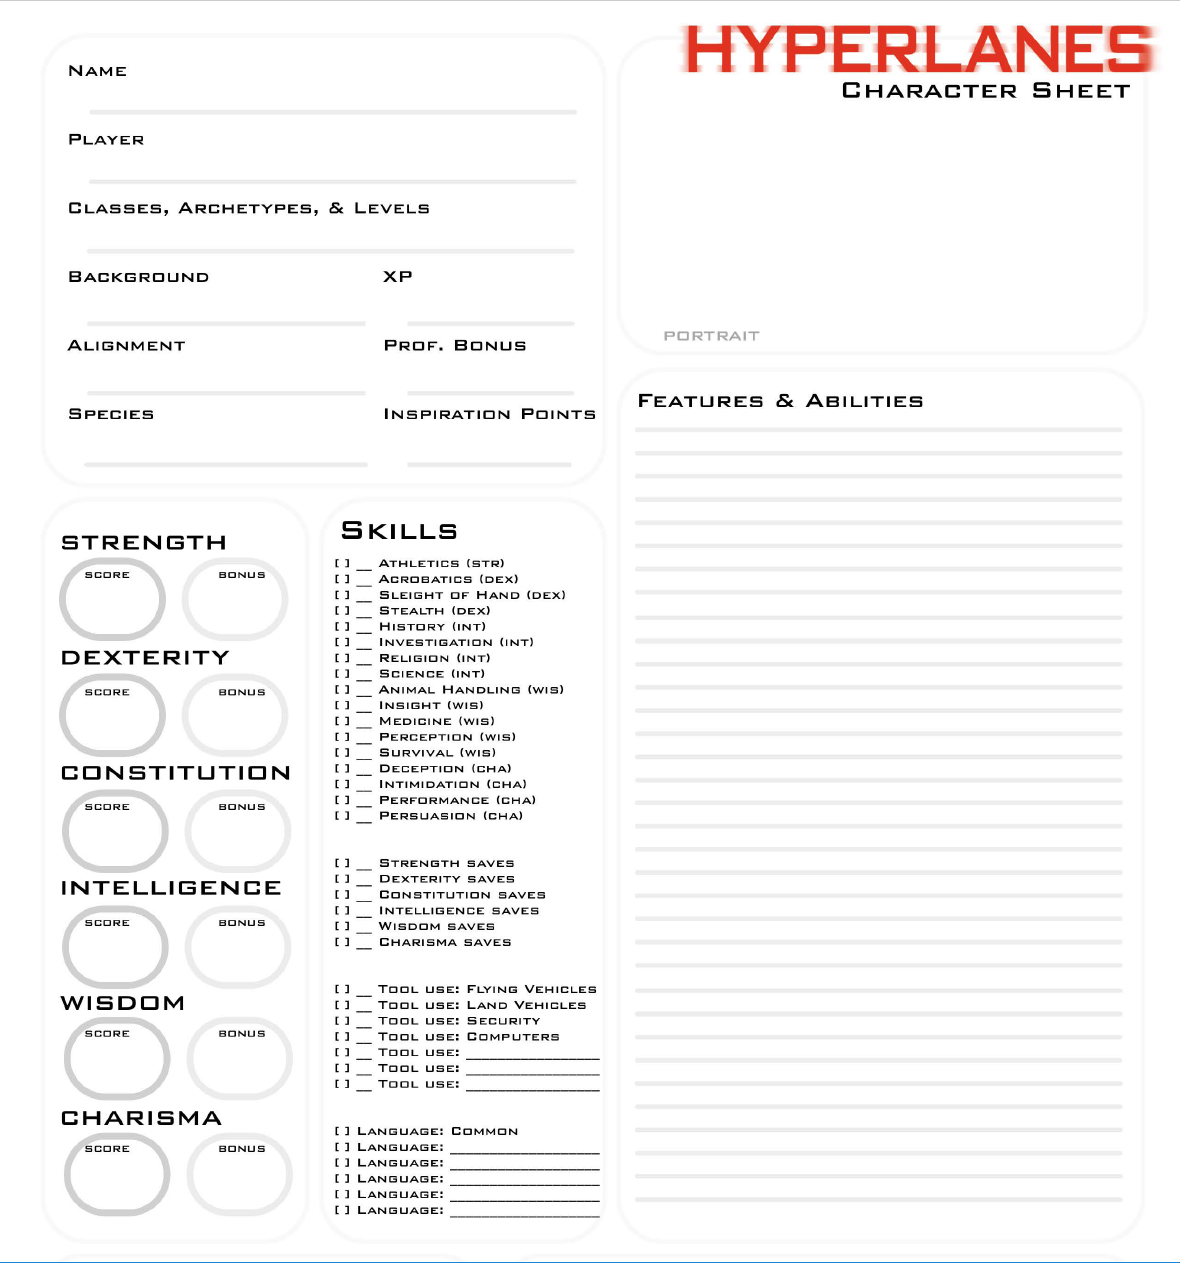 5804-Hyperlanes-preview.png